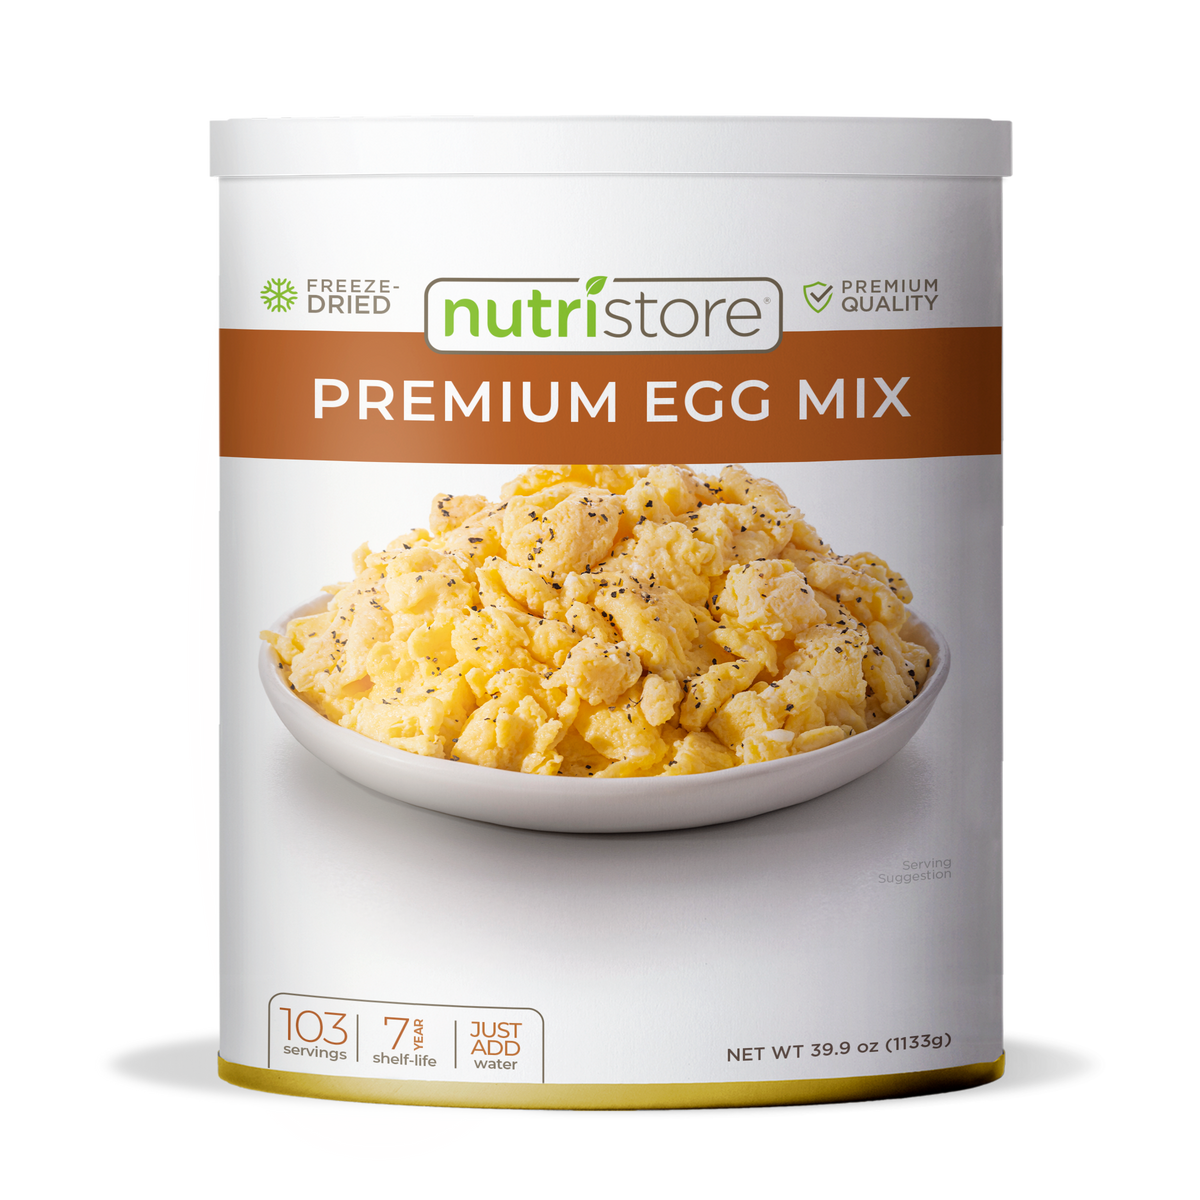 Premium Egg Mix - #10 Can by Nutristore